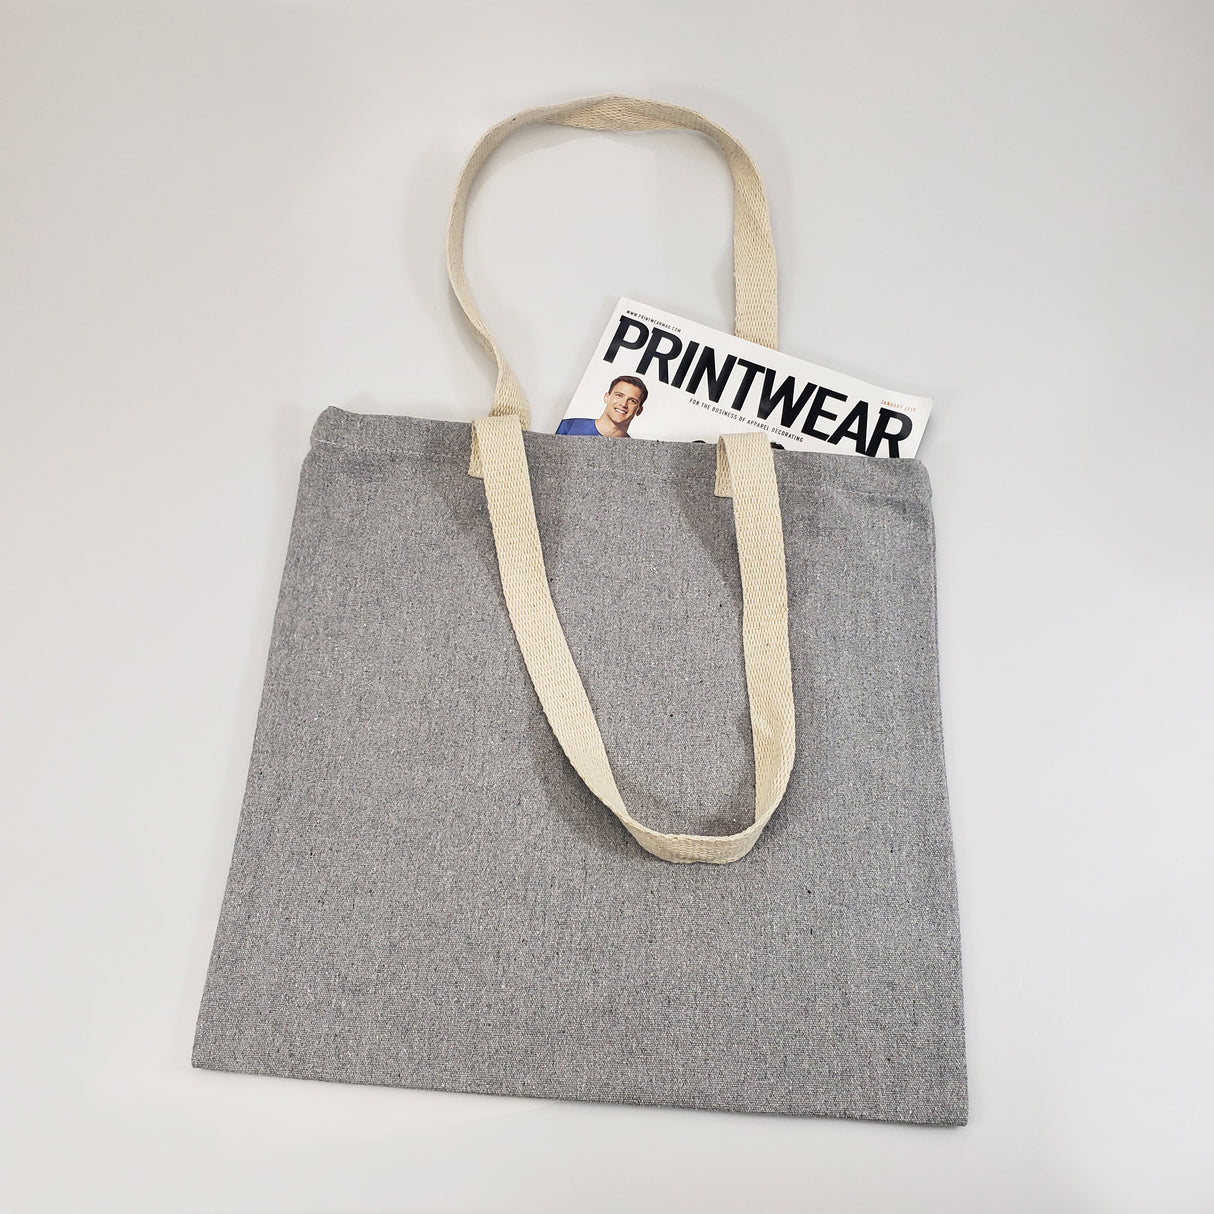 recycled canvas tote 2020 trend